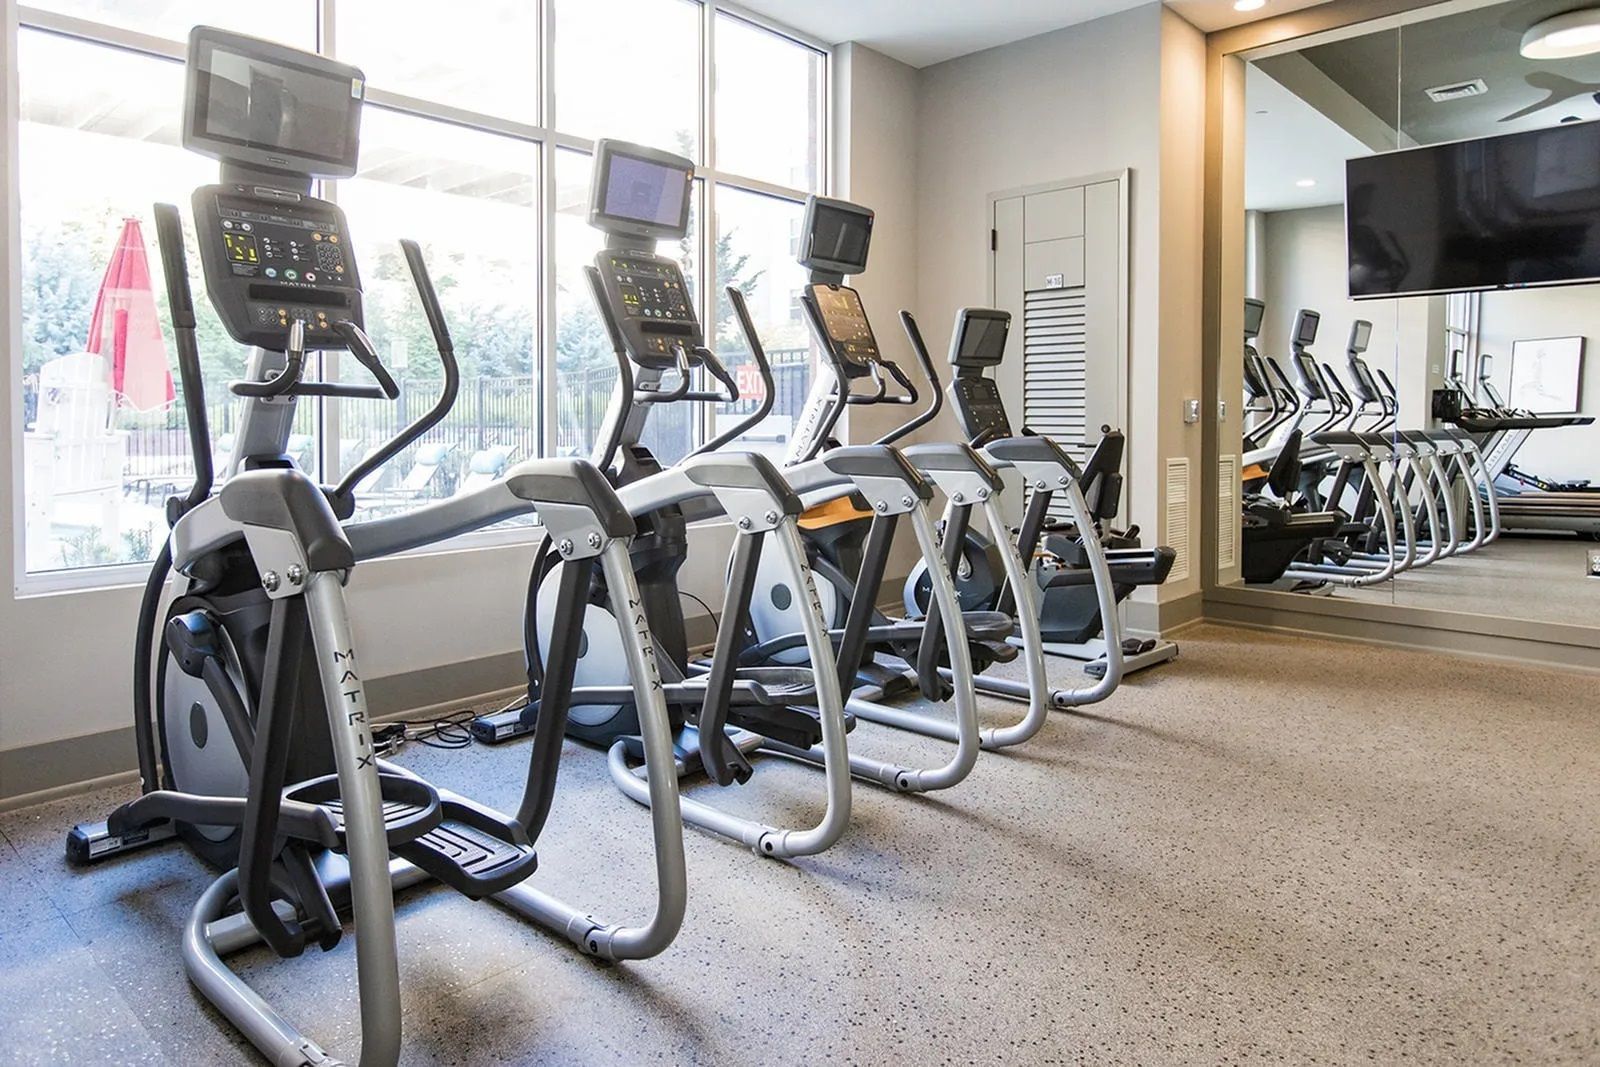 Fitness center at The Southerly.